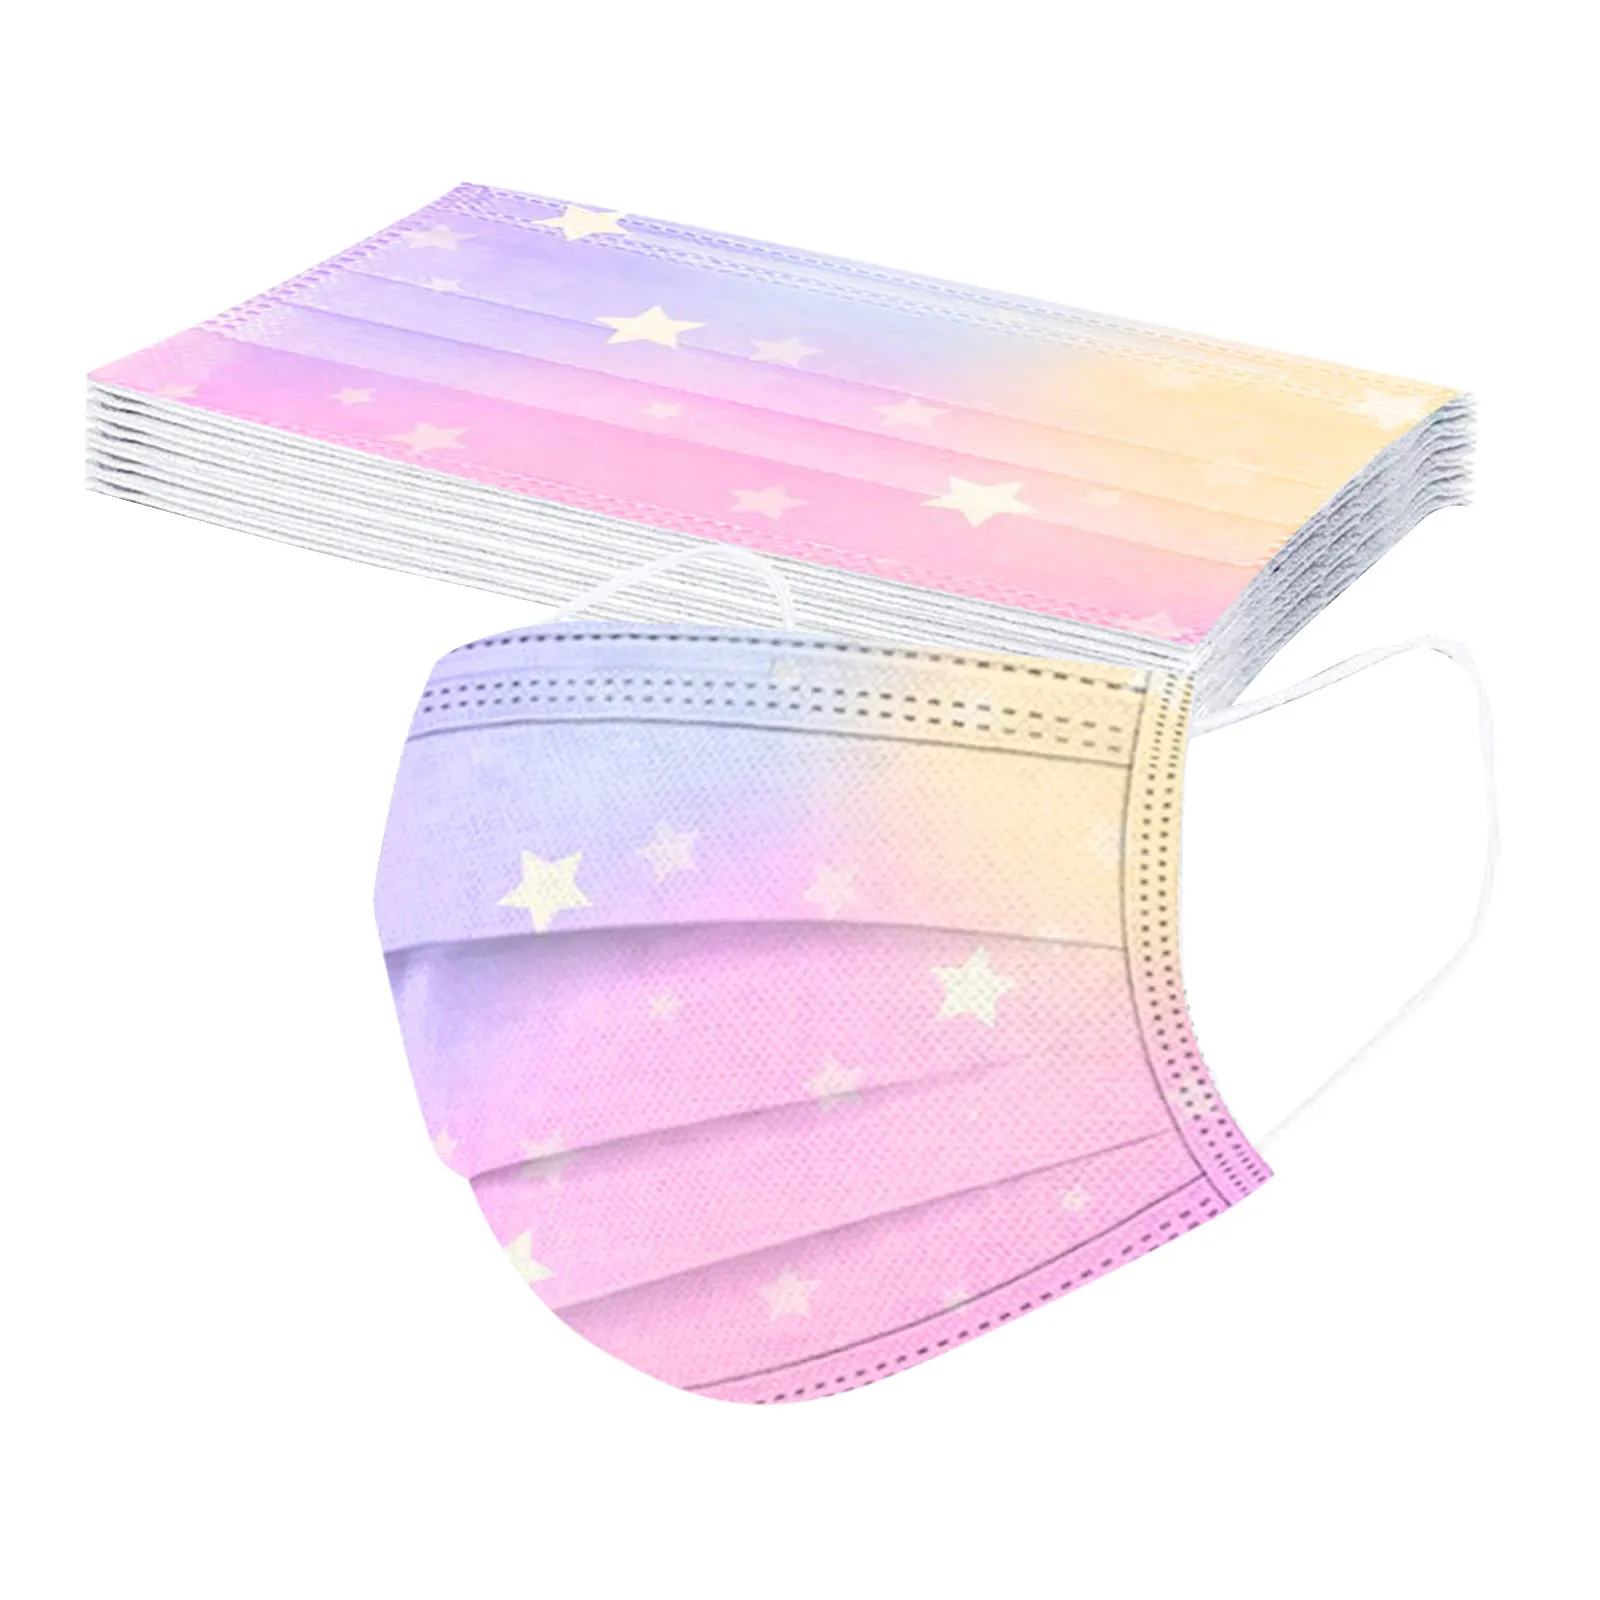 

10pc Children Tie-dye Gradient Printed Mask 3-layer Dustproof Disposable Face Mask Kids Girl Fashion Starry-sky Mask Mascarilla